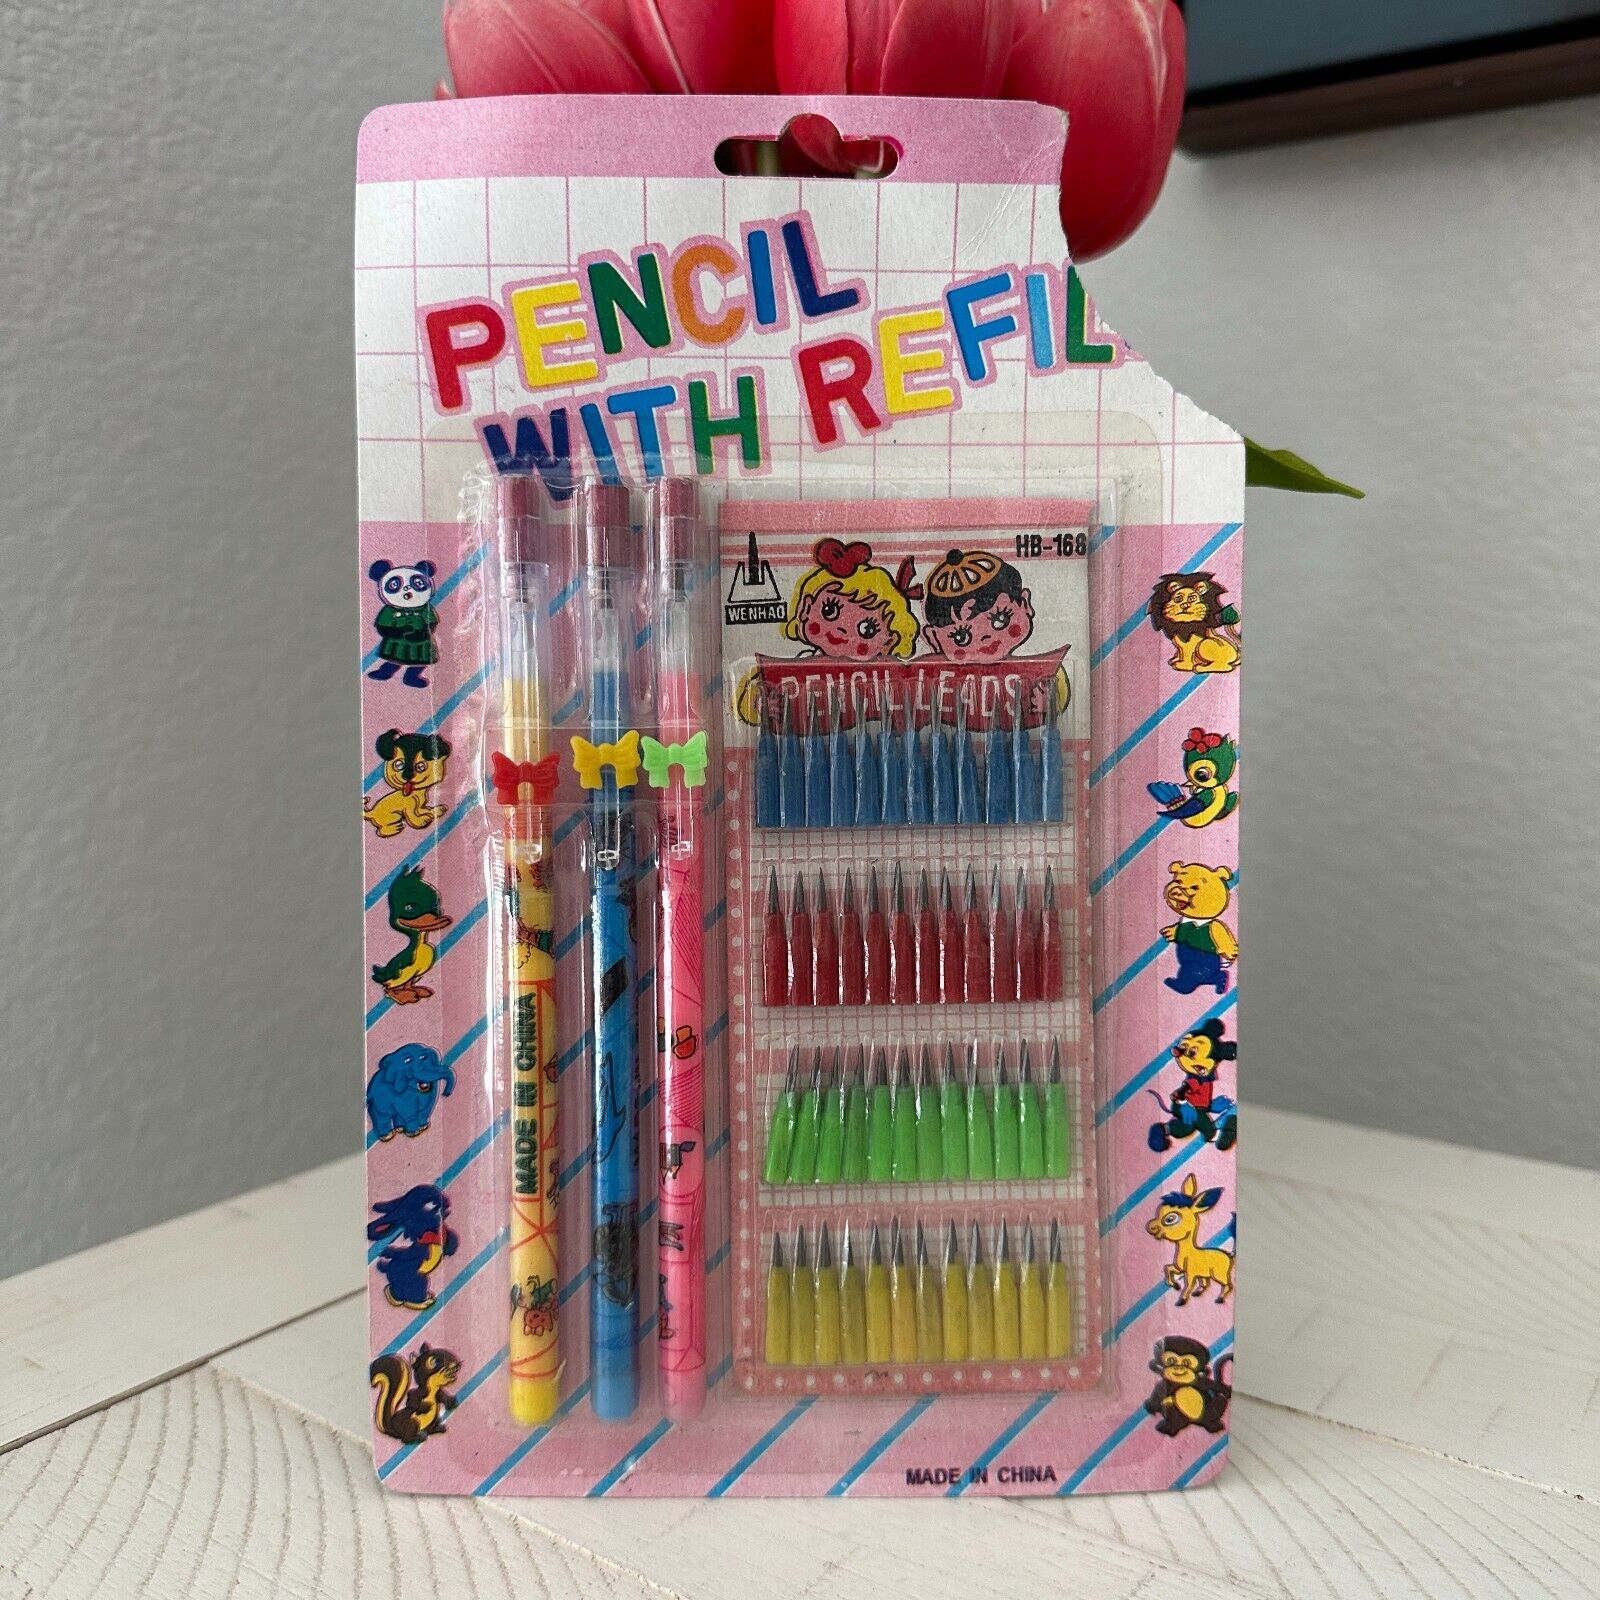 3 Vintage Pop A Point Pencils With 48 Refill Pieces New in Package Unbranded